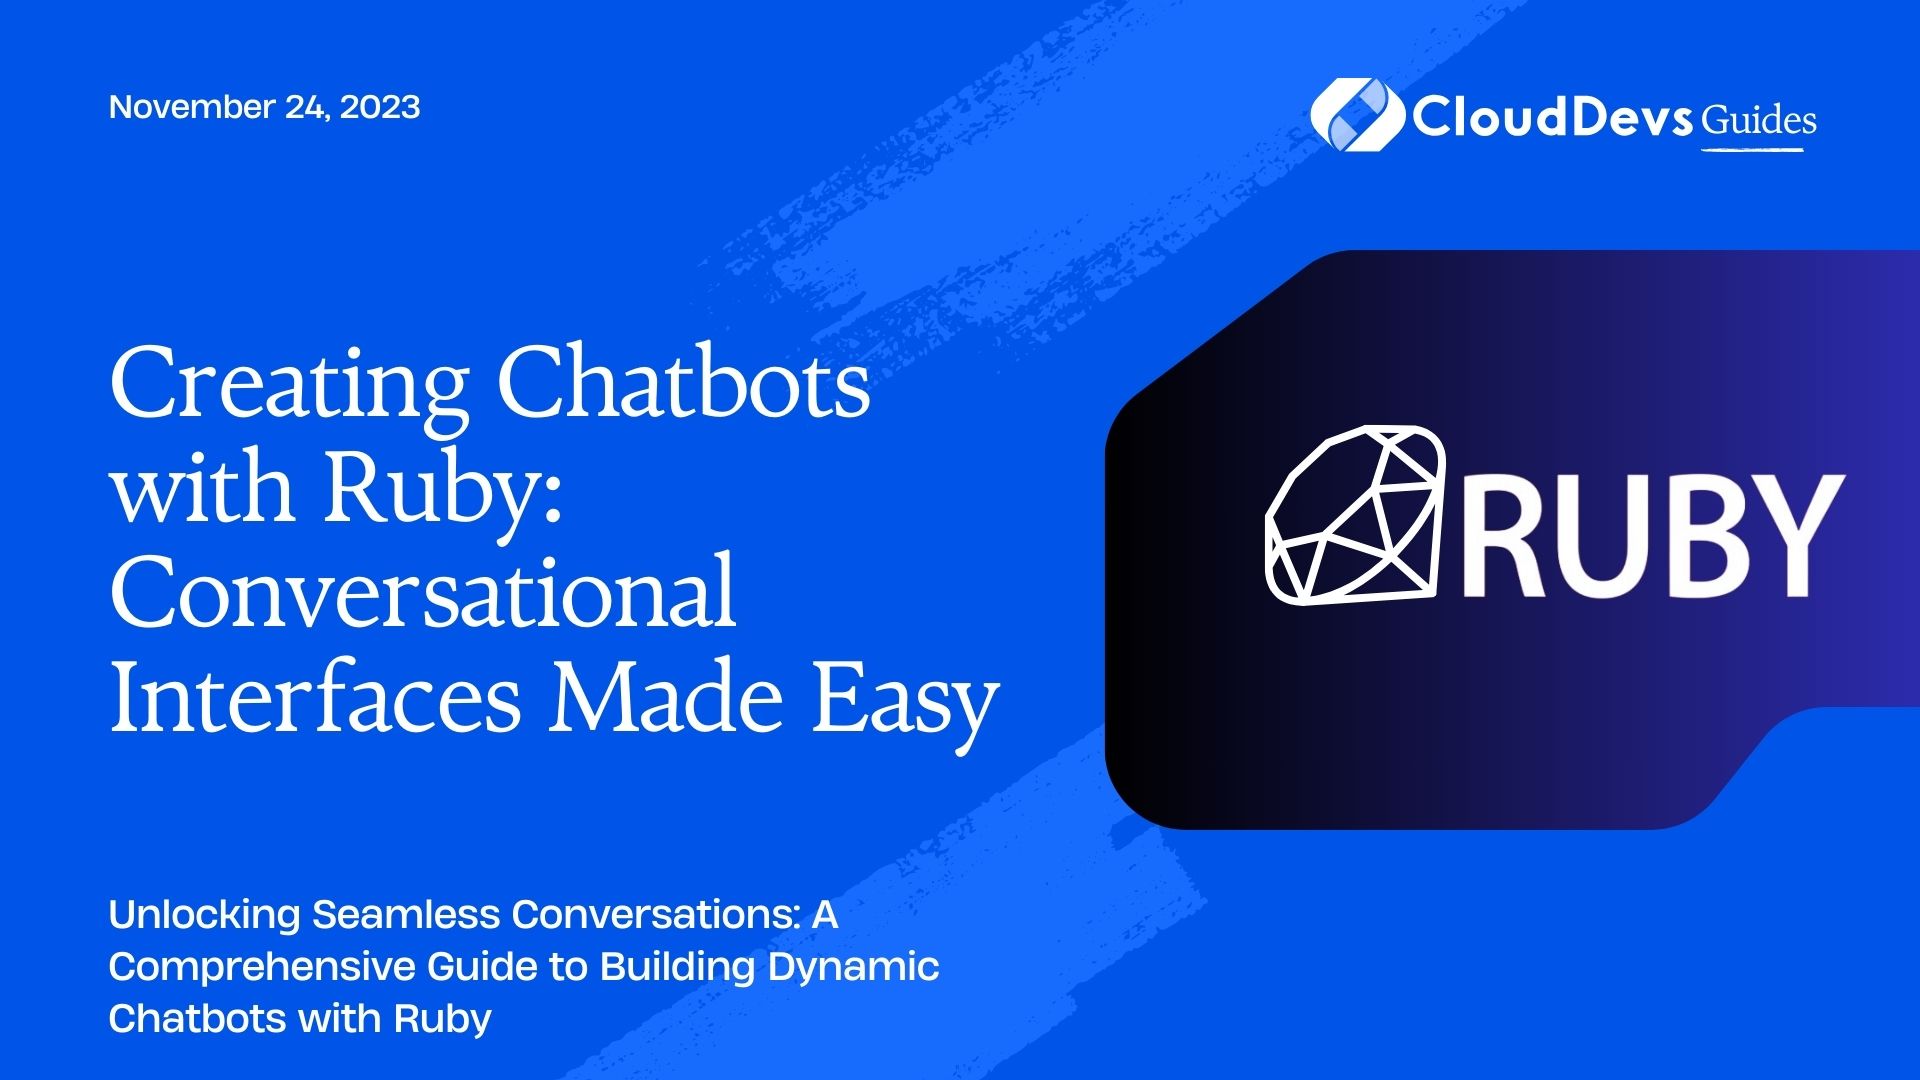 Creating Chatbots with Ruby: Conversational Interfaces Made Easy